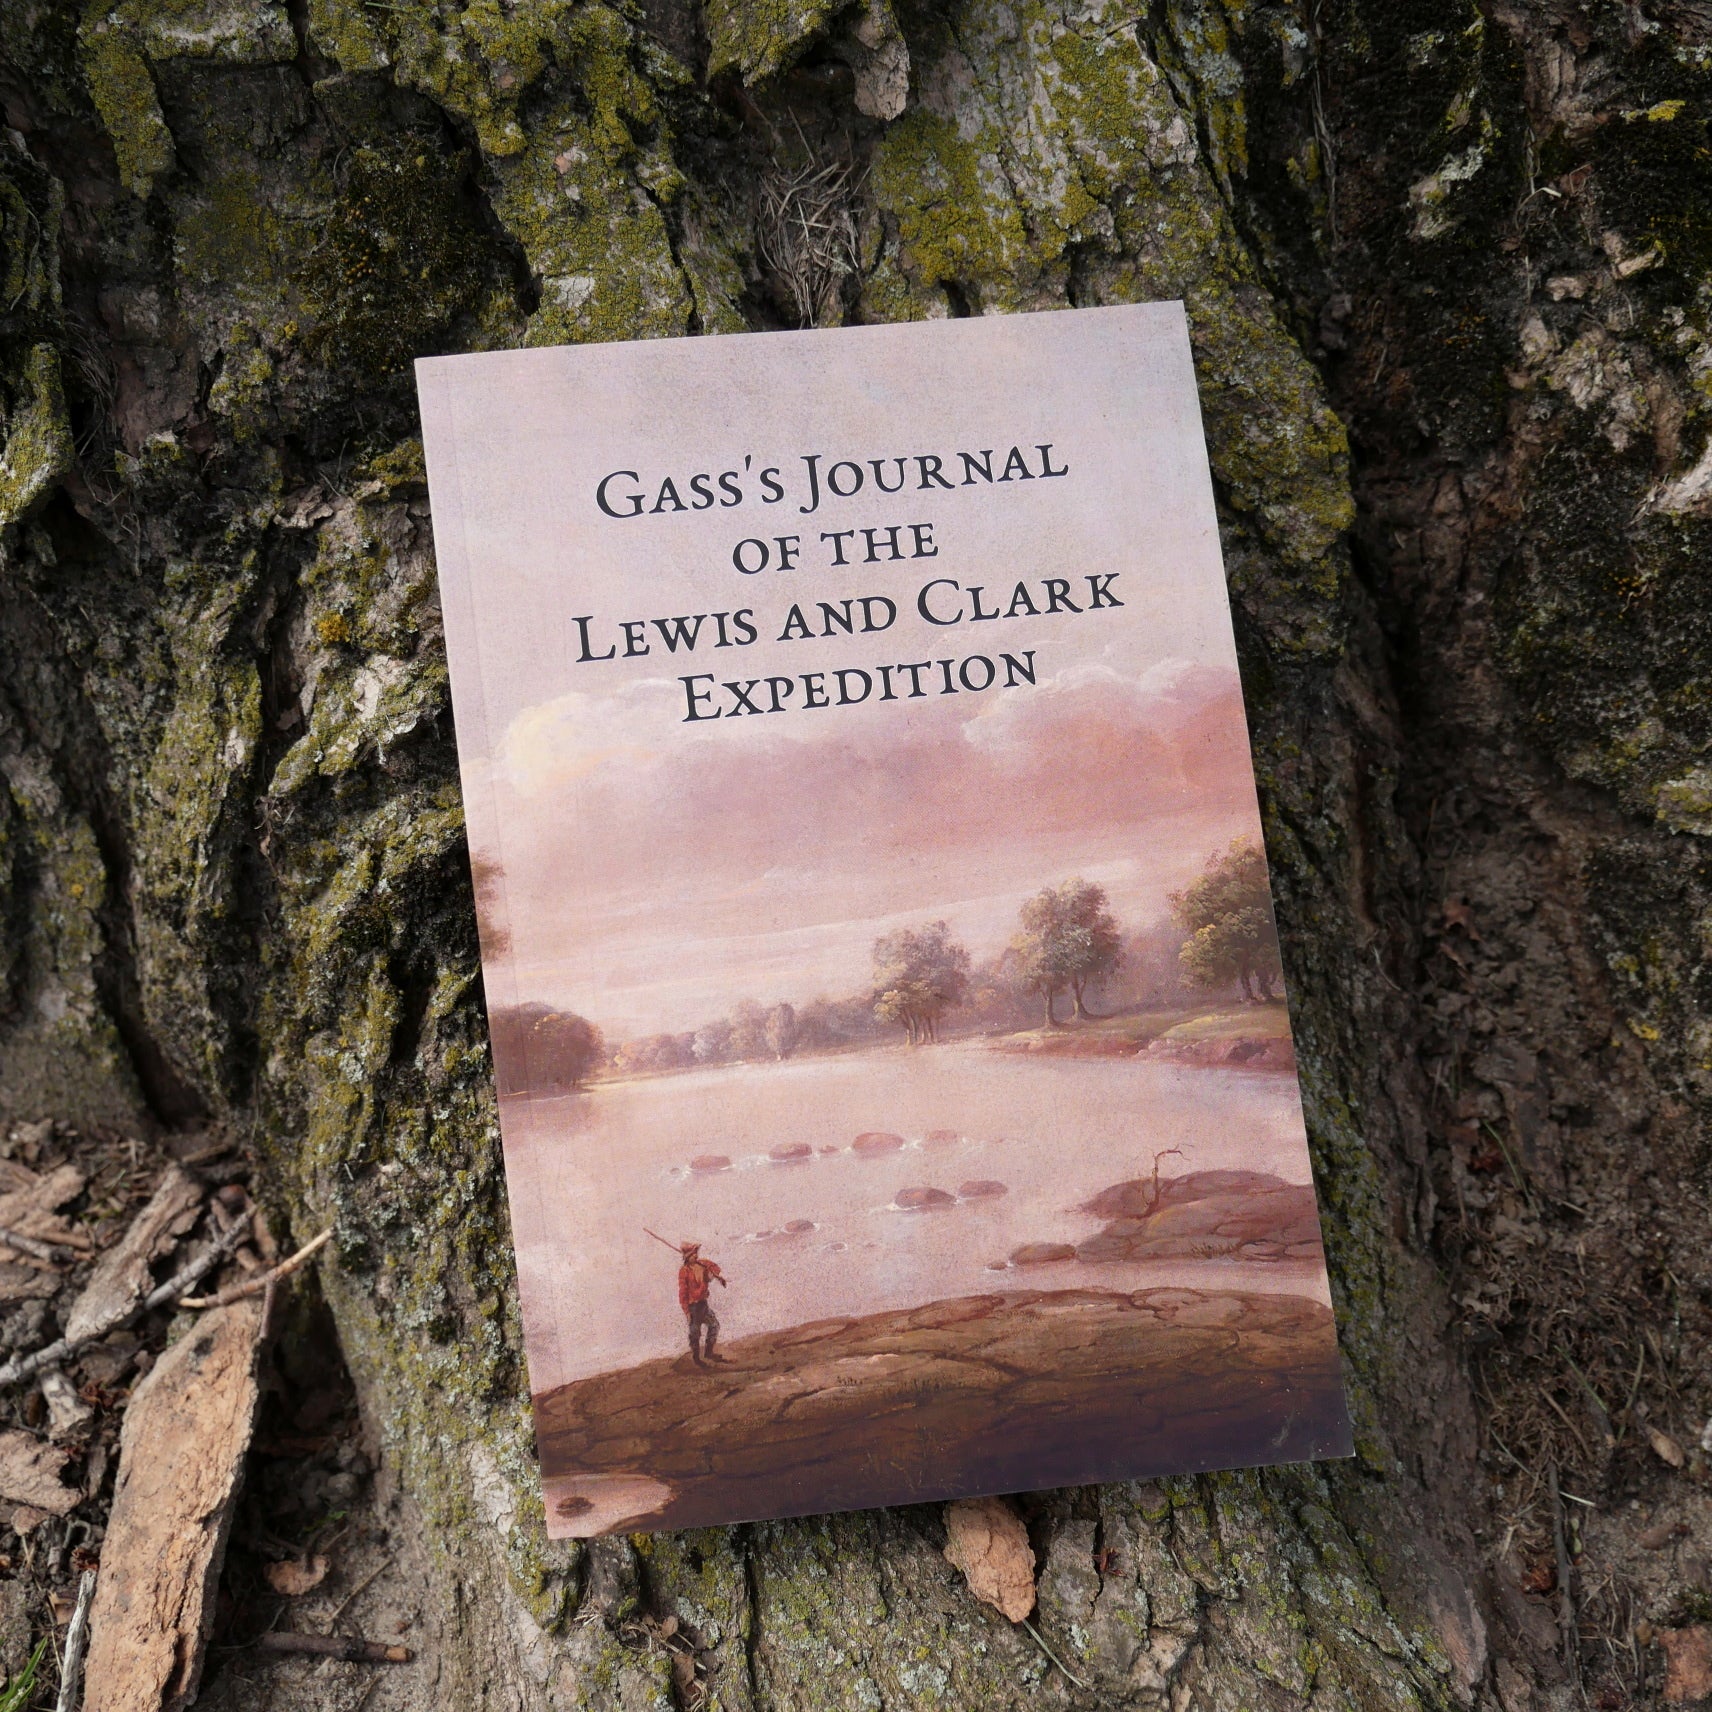 Gass's Journal of the Lewis and Clark Expedition – Townsends